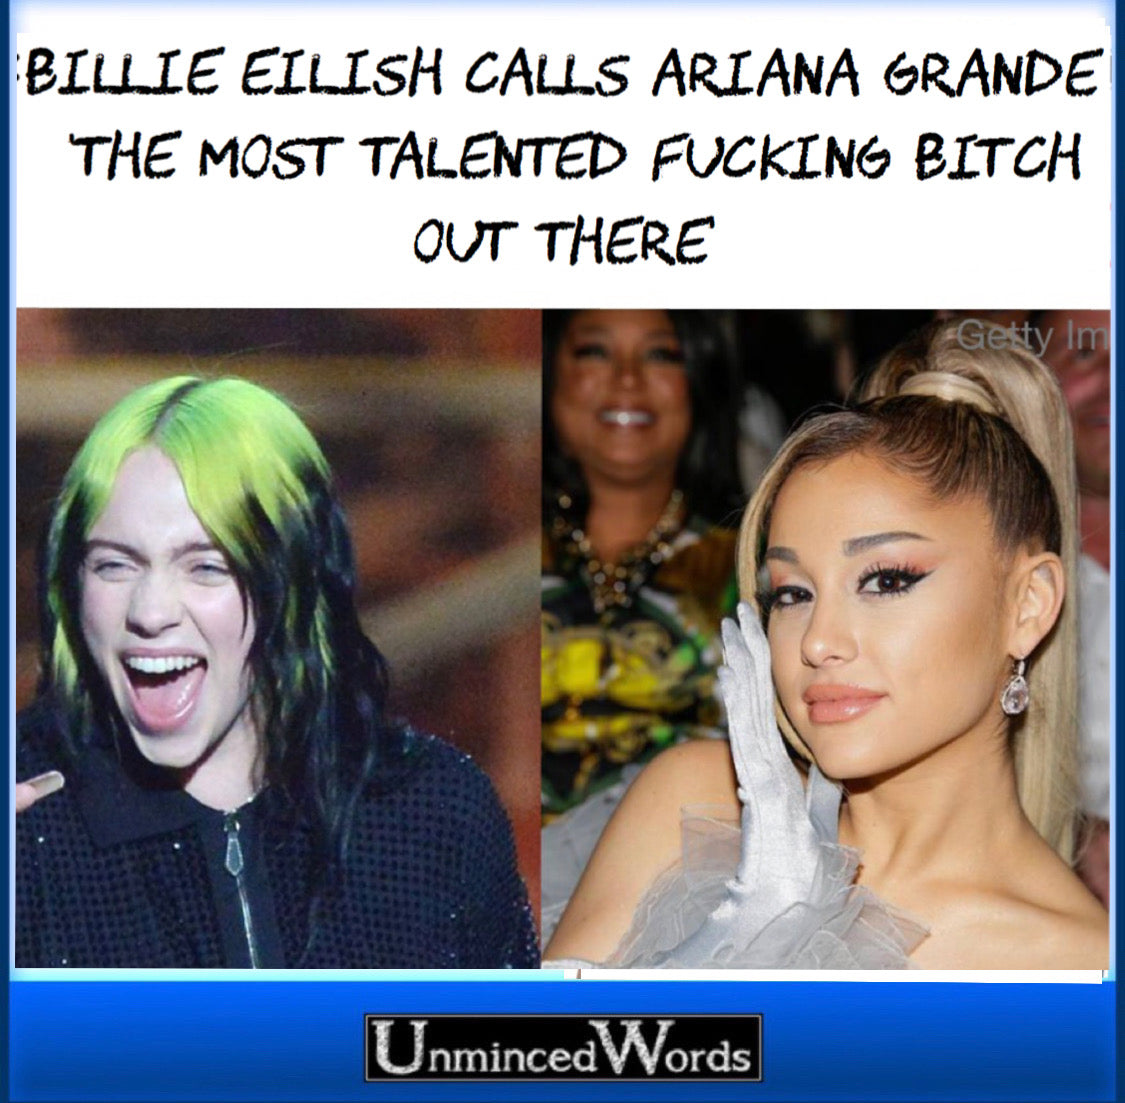 BILLIE EILISH CALLS ARIANA GRANDE 'THE MOST TALENTED FUCKING BITCH OUT THERE'